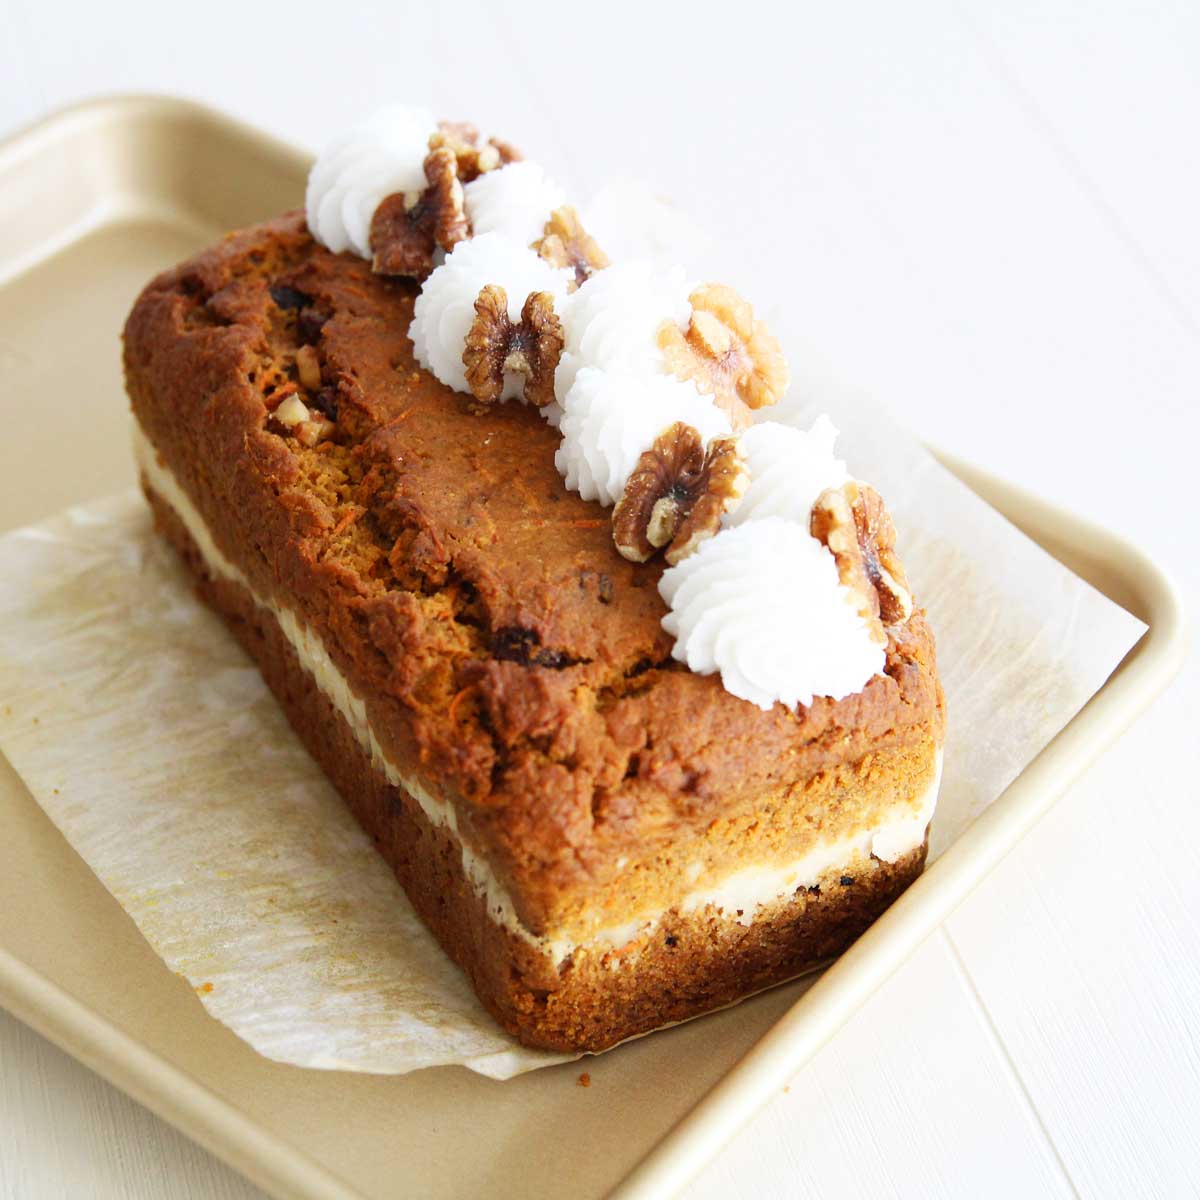 Ultimate List of Pumpkin Bread Ideas - Part 2: Icing, Frosting & Topping Variations - Nutella Chocolate Whipped Cream